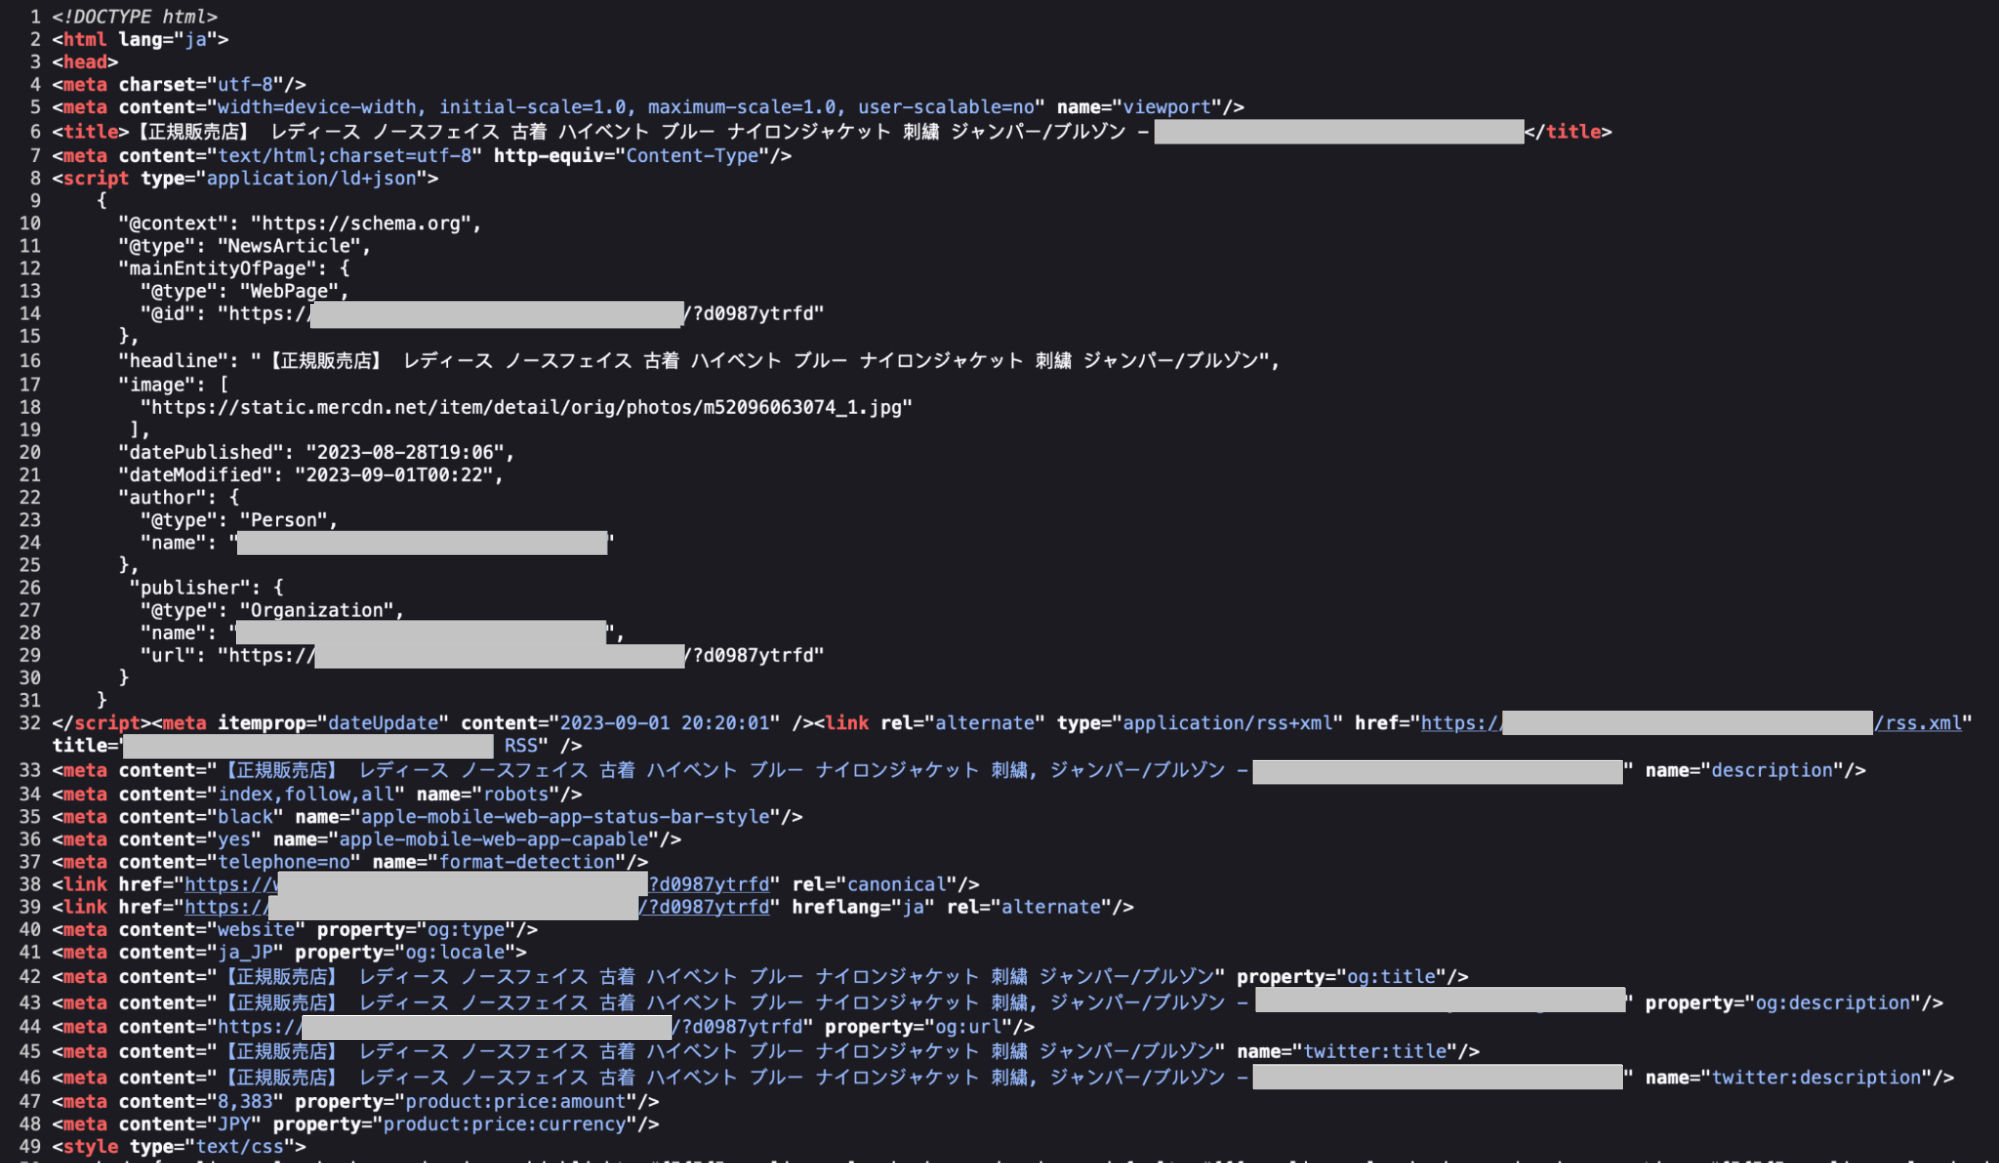 Japanese SEO Spam and keywords seen when viewing page source code